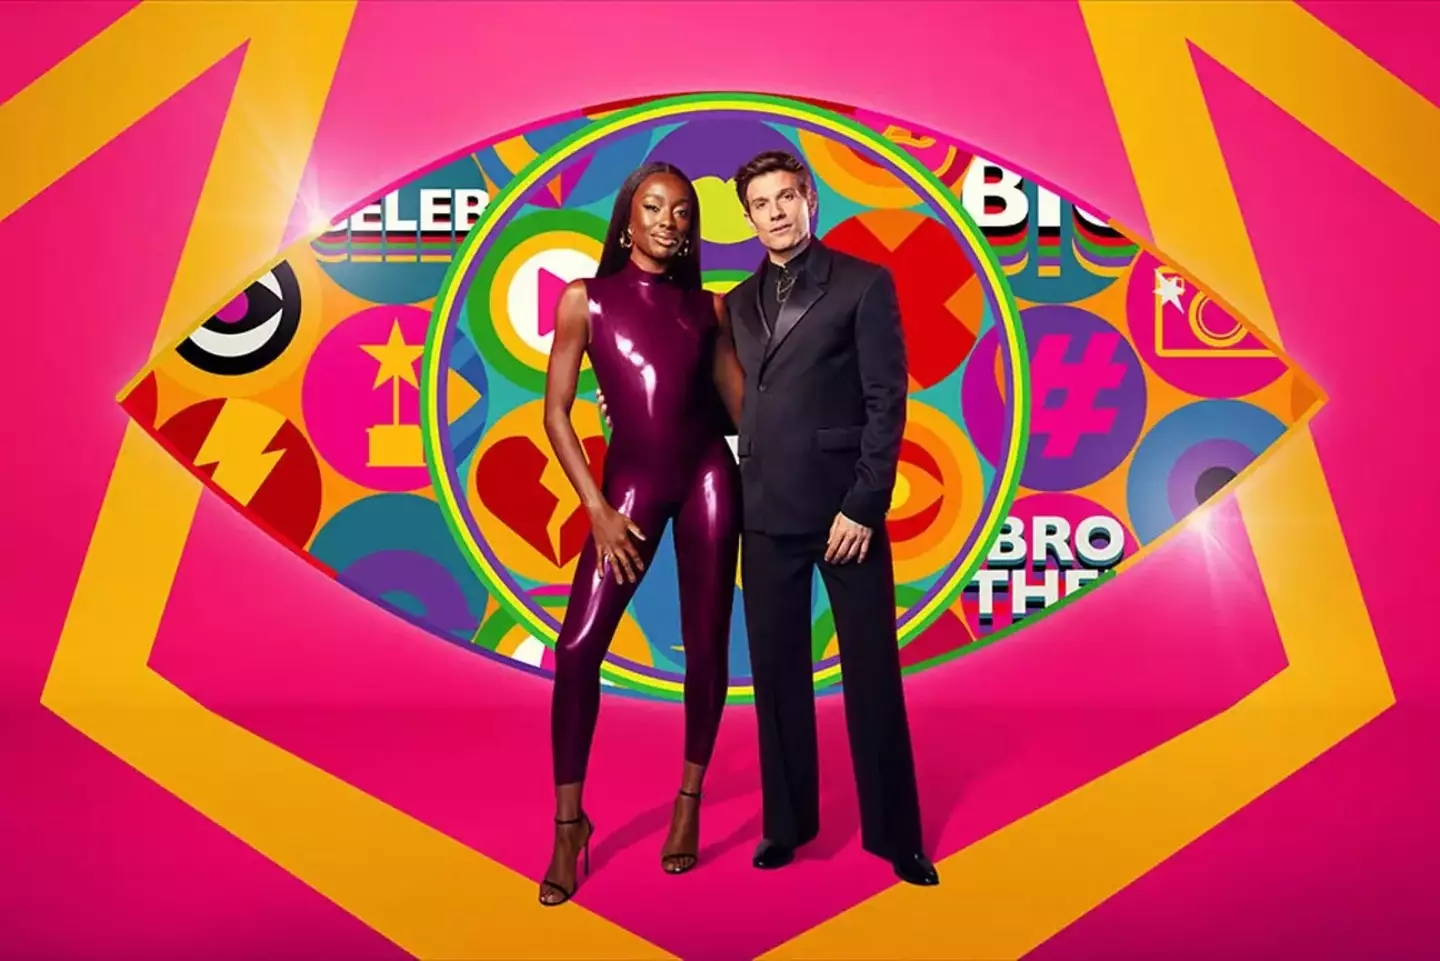 Tonight was Celebrity Big Brother first live eviction (7 March).